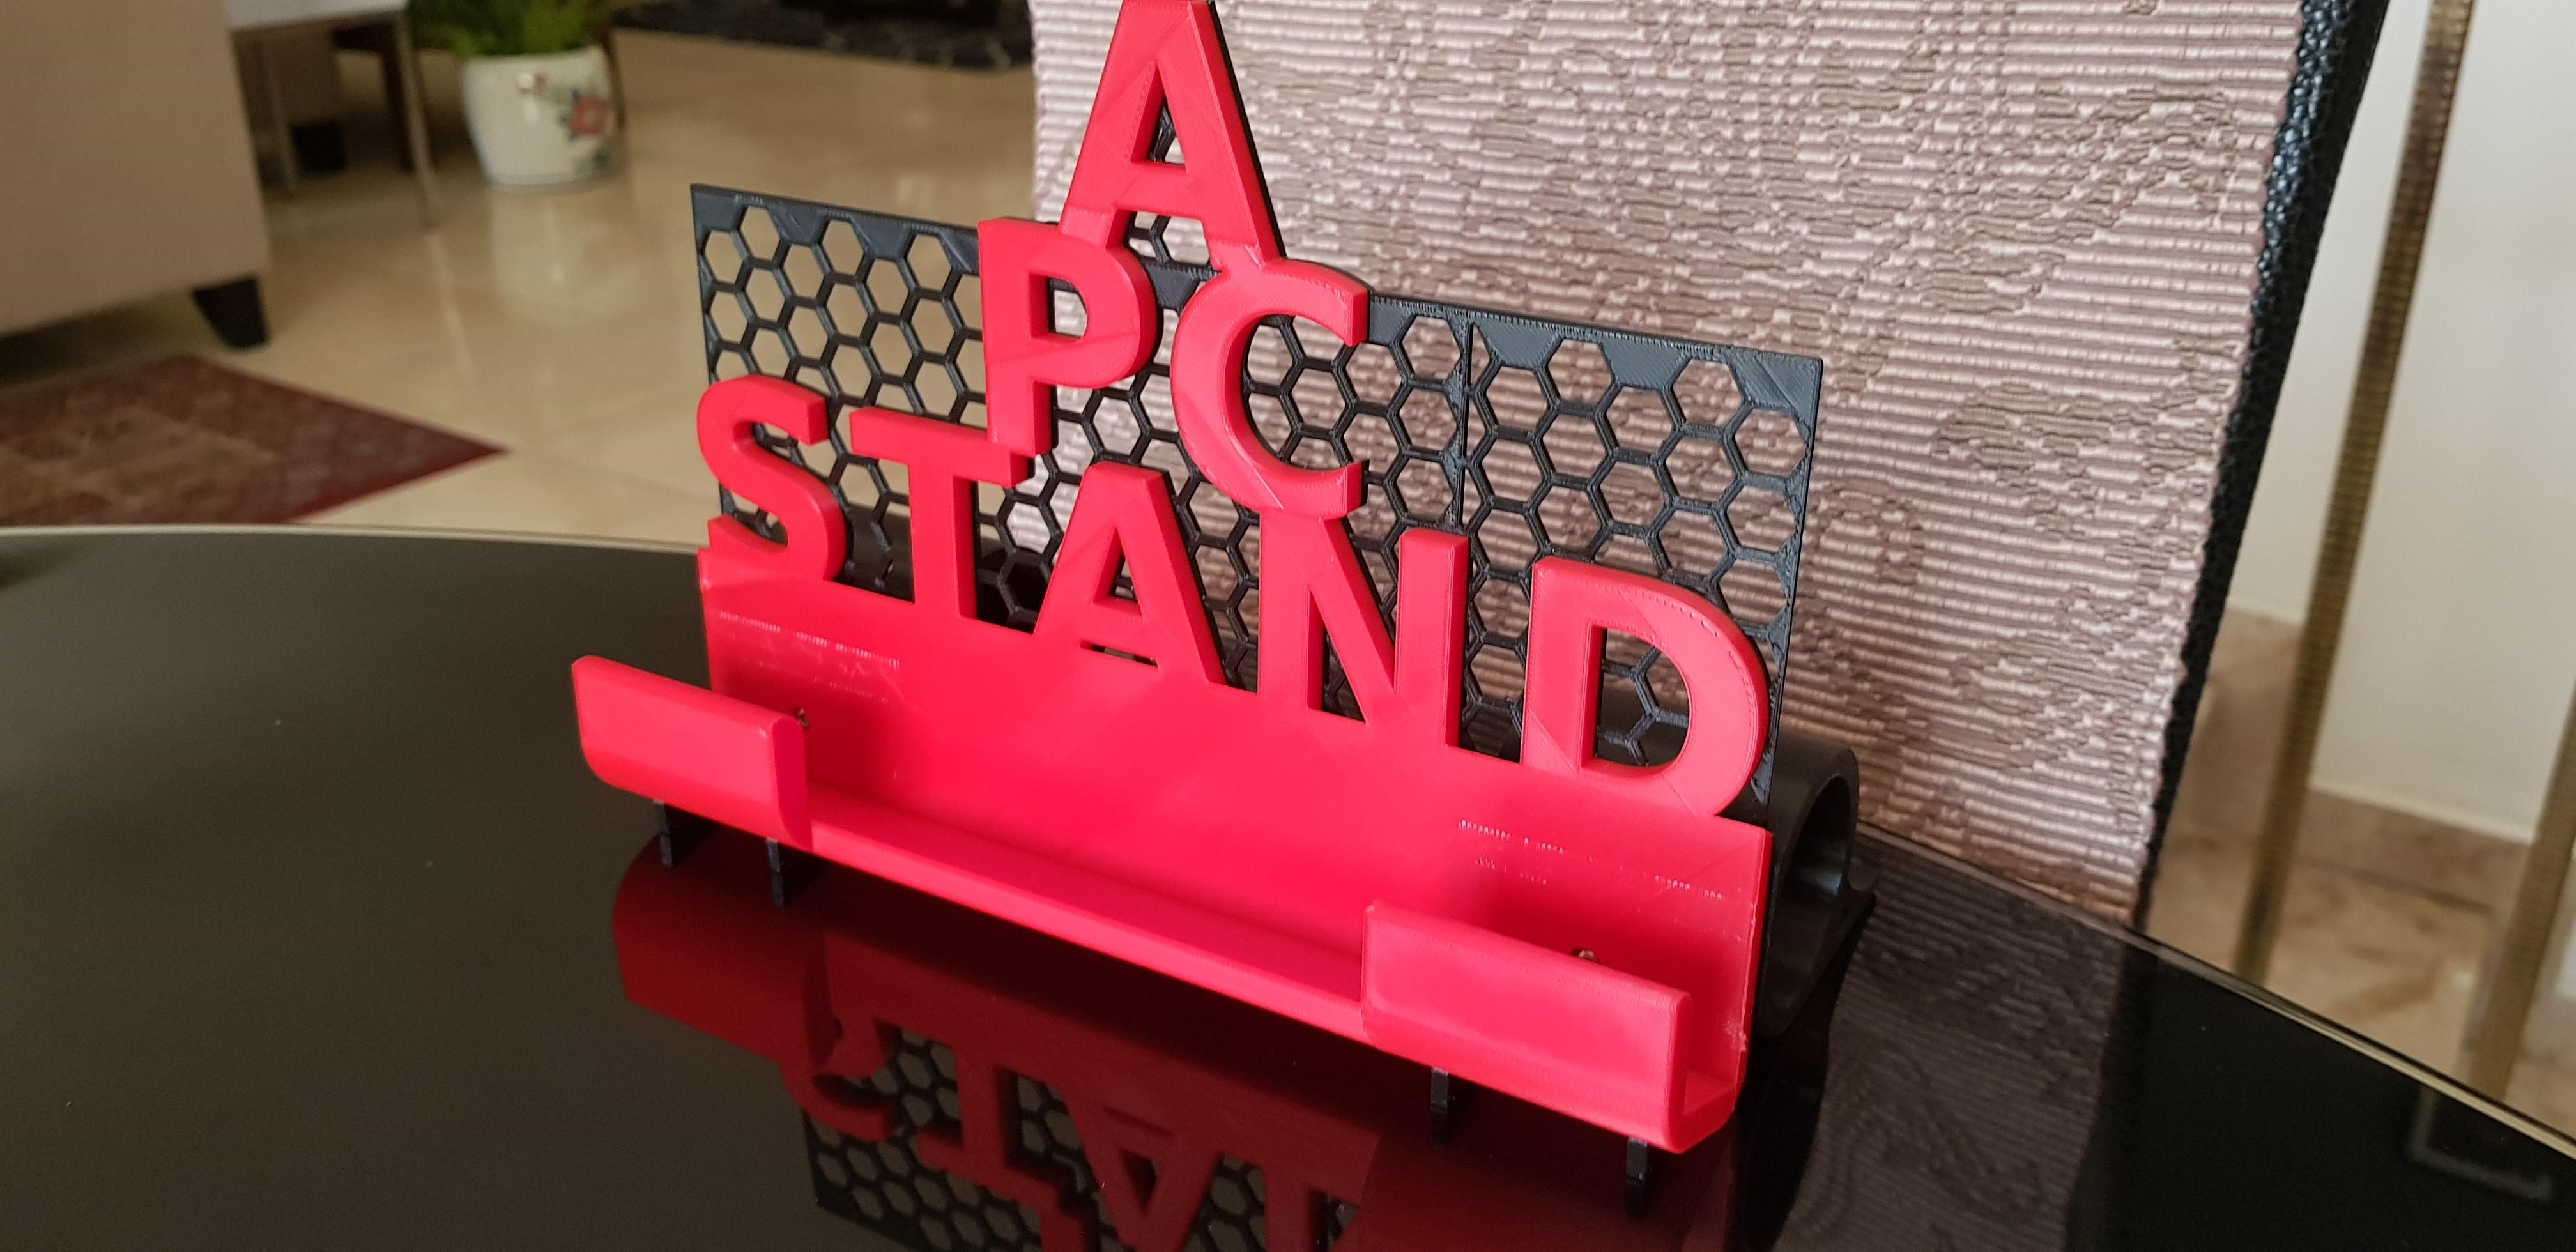 A PC (Laptop) Stand